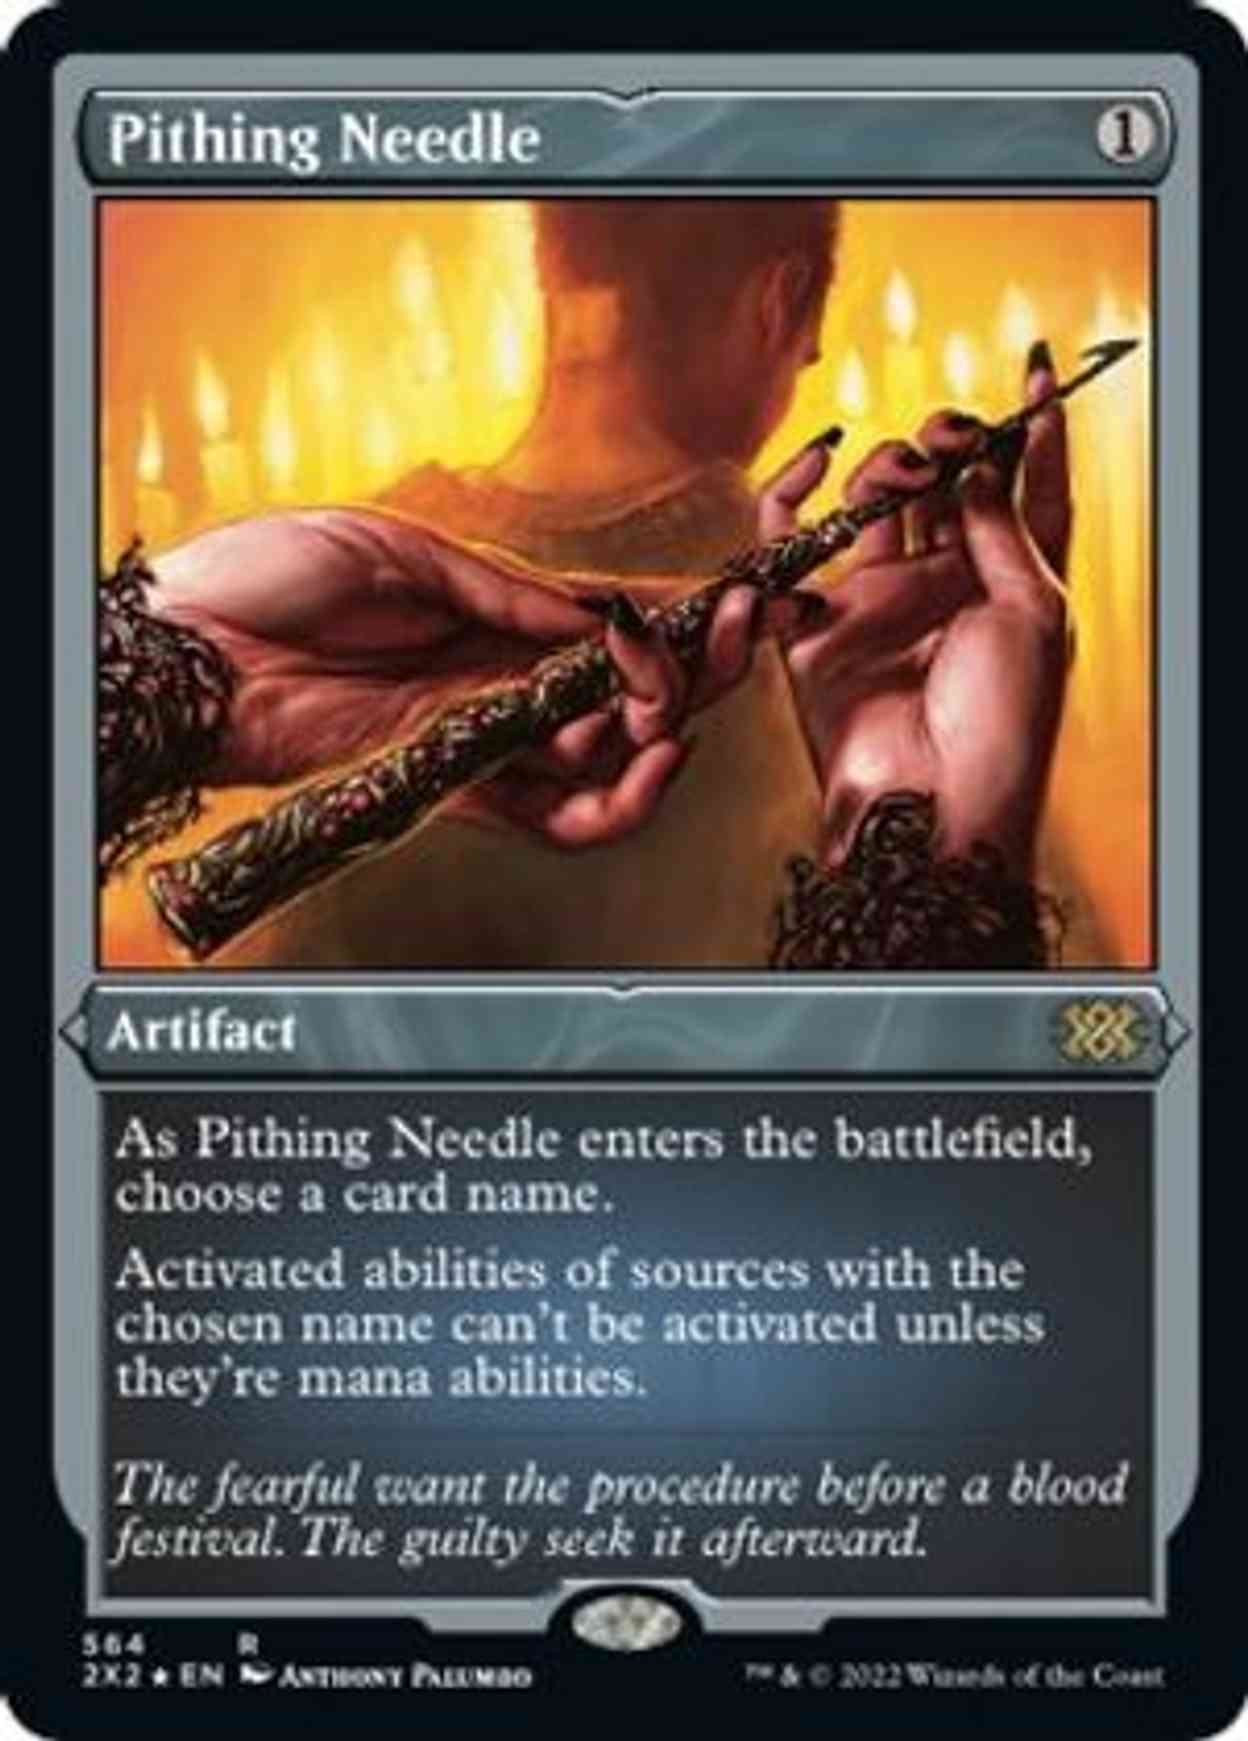 Pithing Needle (Foil Etched) magic card front